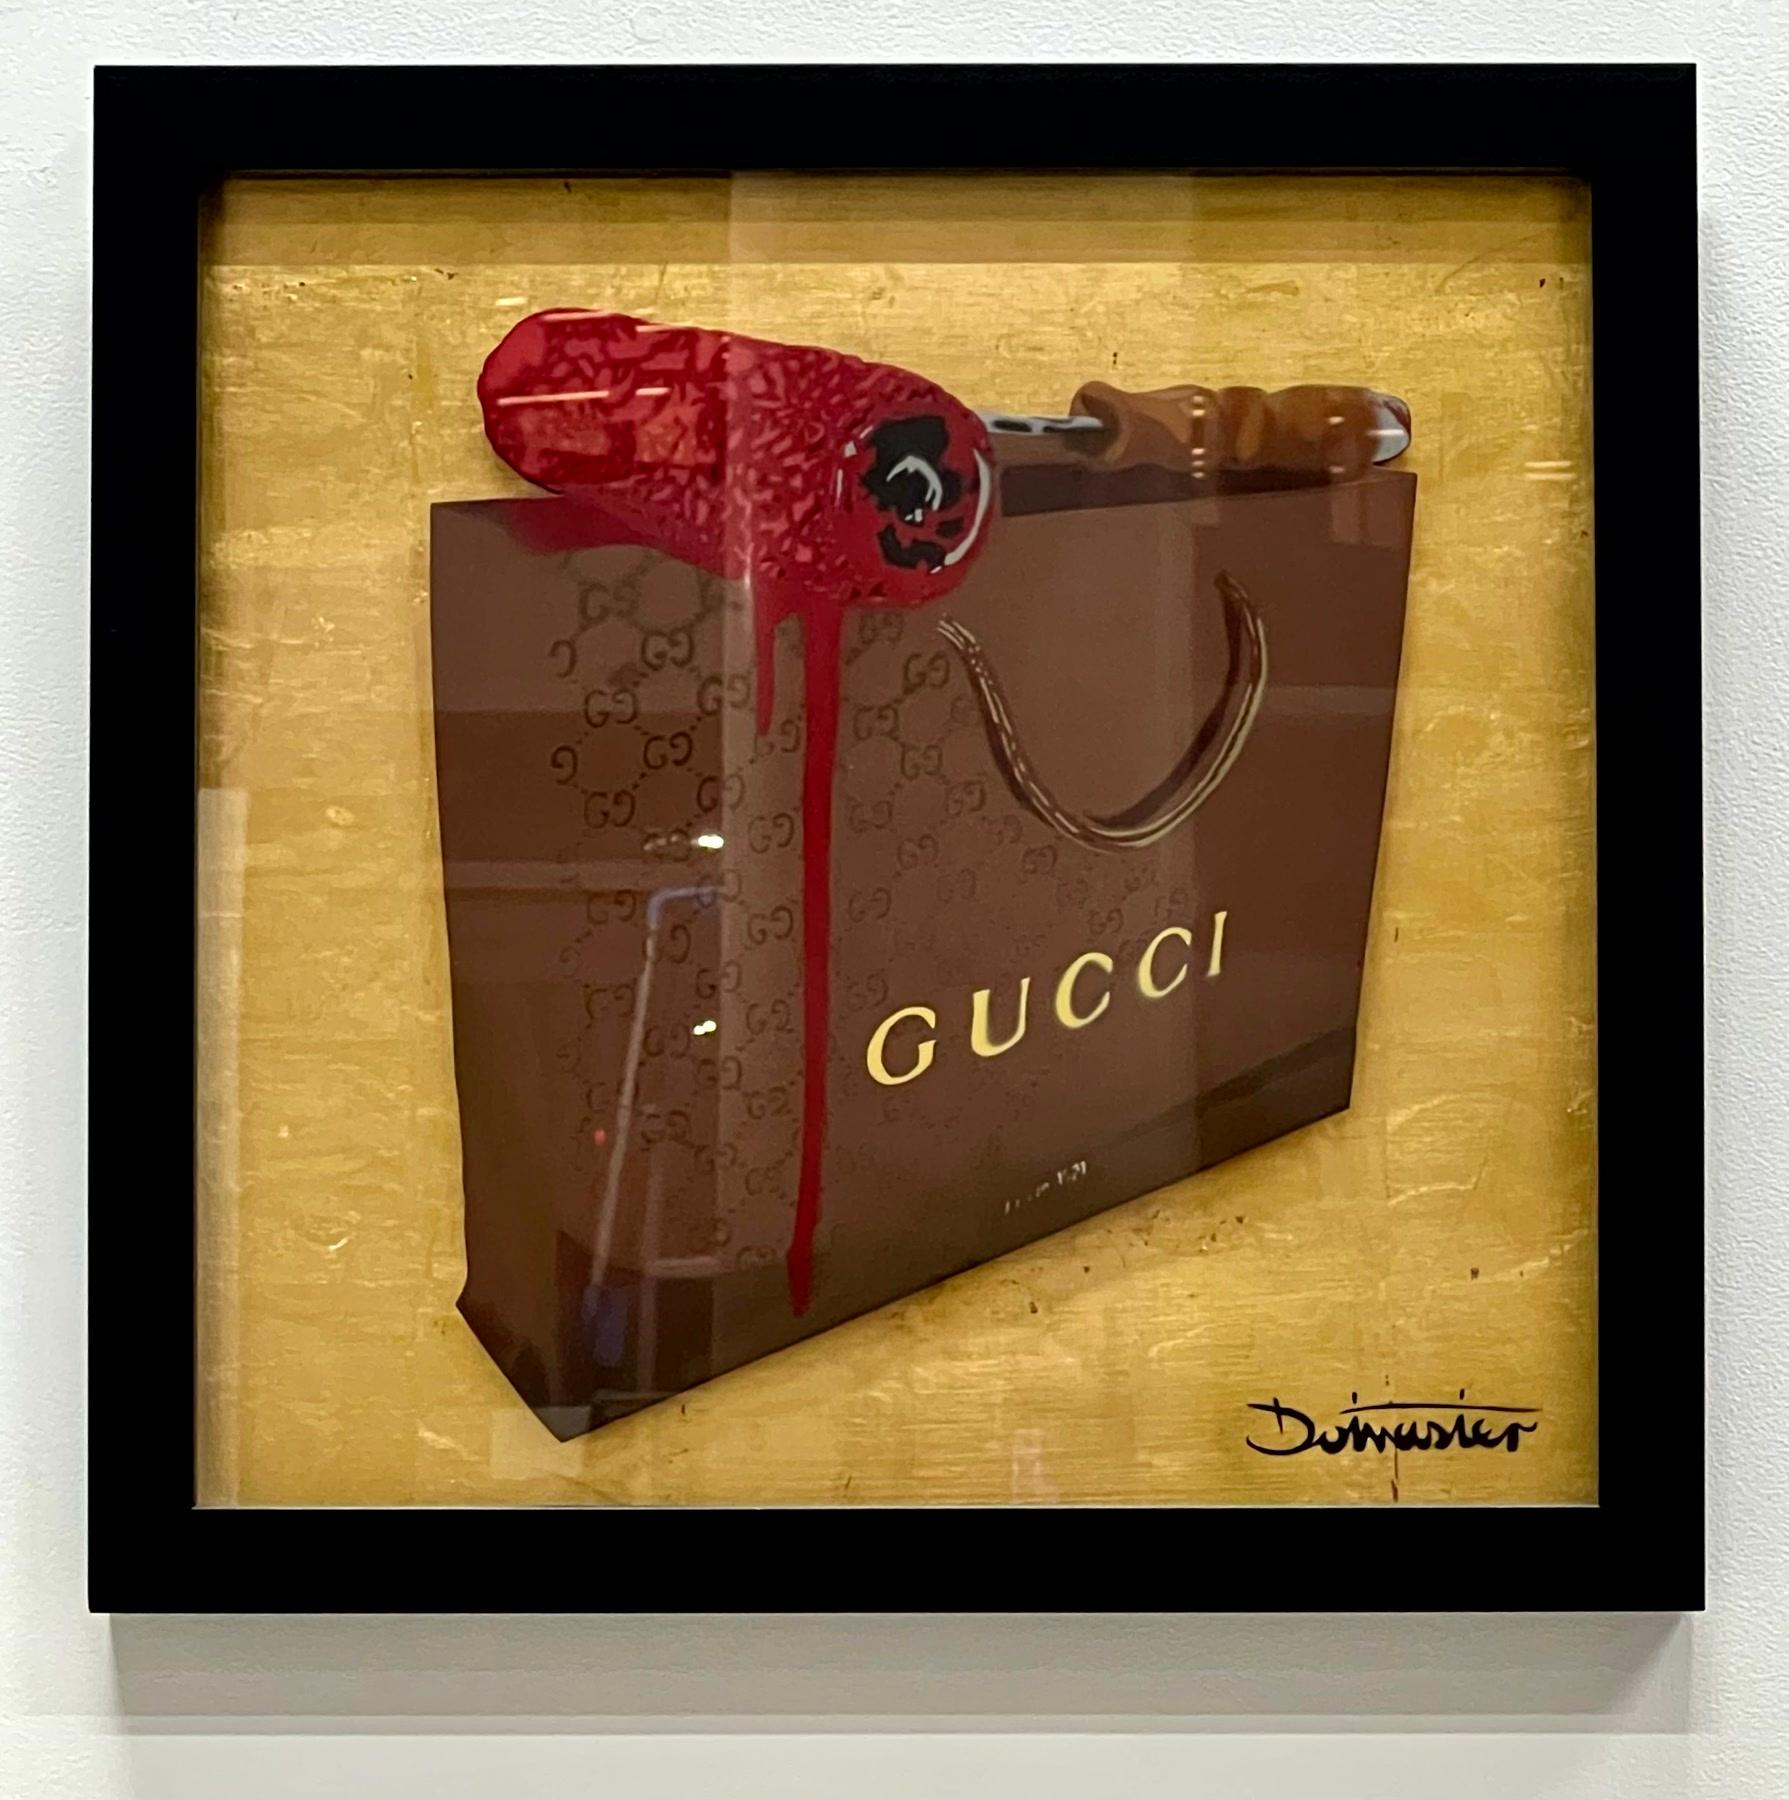 The Dotmaster - Stencil Street Art painting by British artist Dotmasters:  Gucci high roller 24 k For Sale at 1stDibs